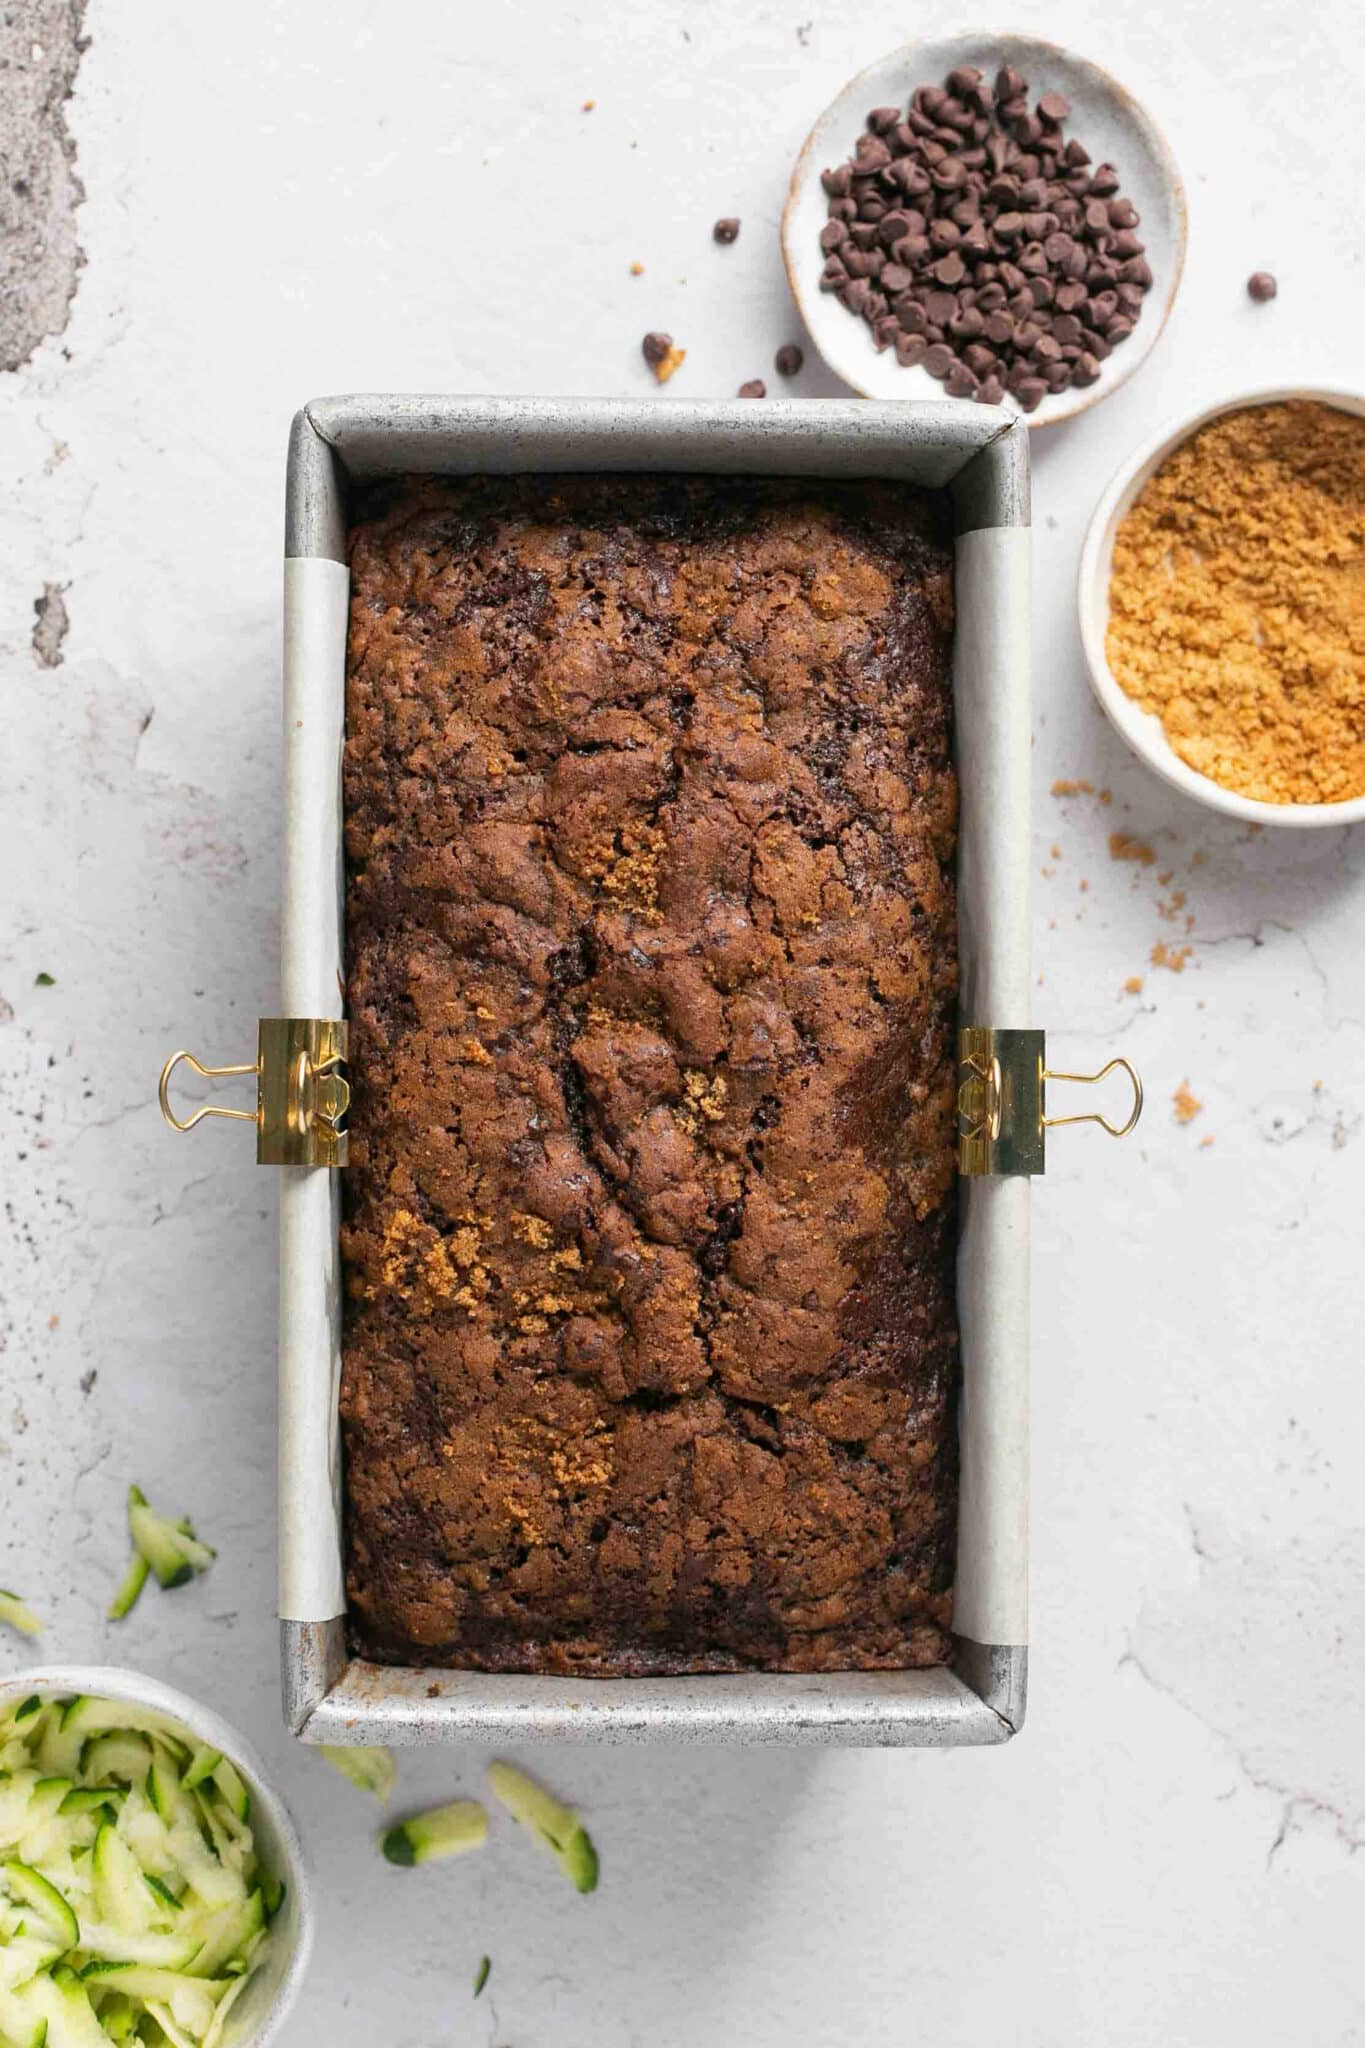 Chocolate zucchini bread baked in a loaf pan.